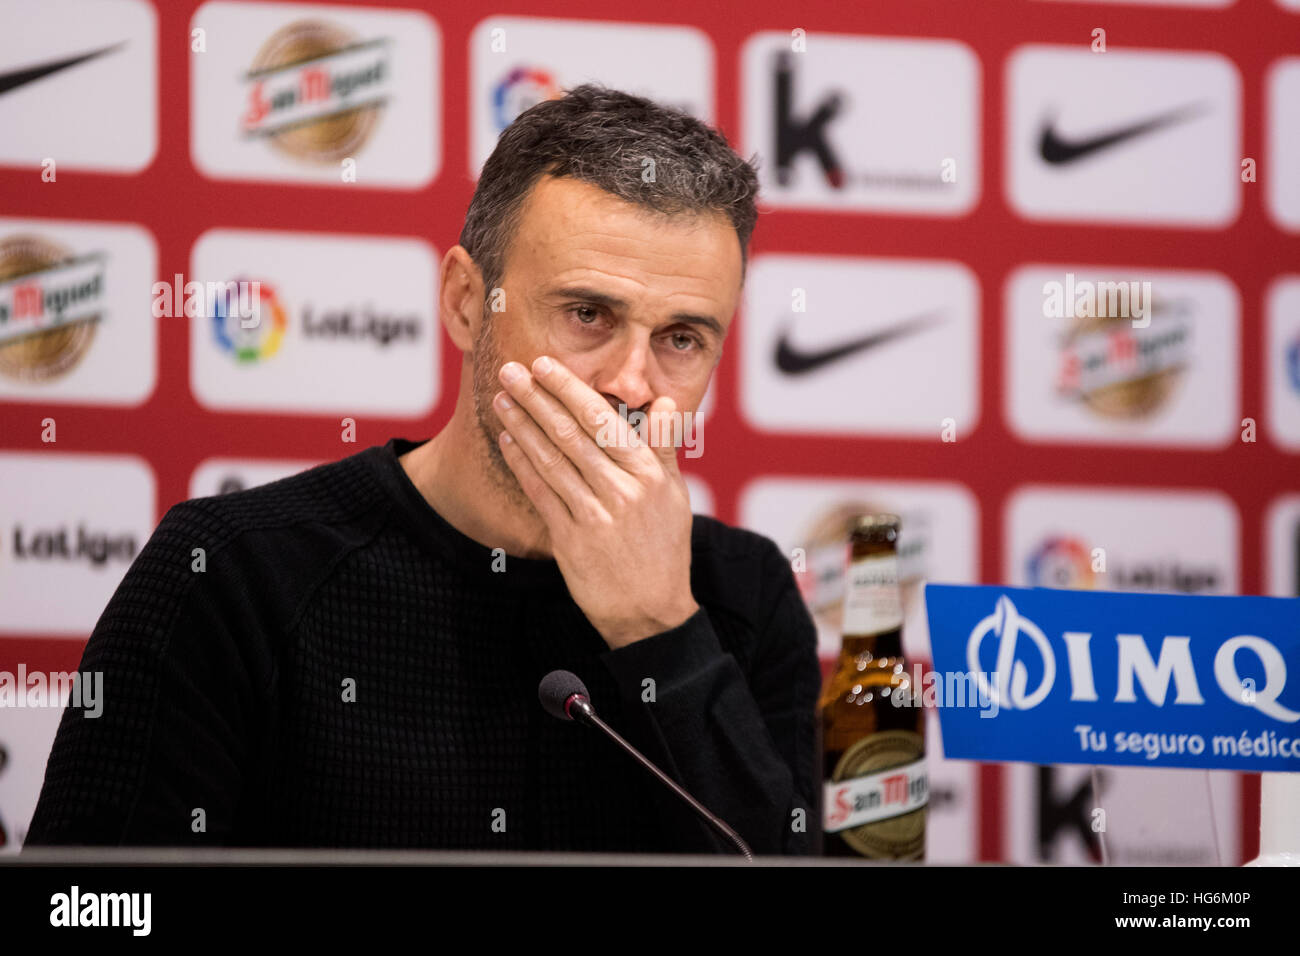 Bilbao, Spain. 5th January, 2017. Luis Enrique (Coach, FC Barcelona) during the press conference of football match of Round of 16 of Spanish King’s Cup between Athletic Club and FC Barcelona at San Mames Stadium on January 5, 2017 in Bilbao, Spain. ©David Gato/Alamy Live News Stock Photo